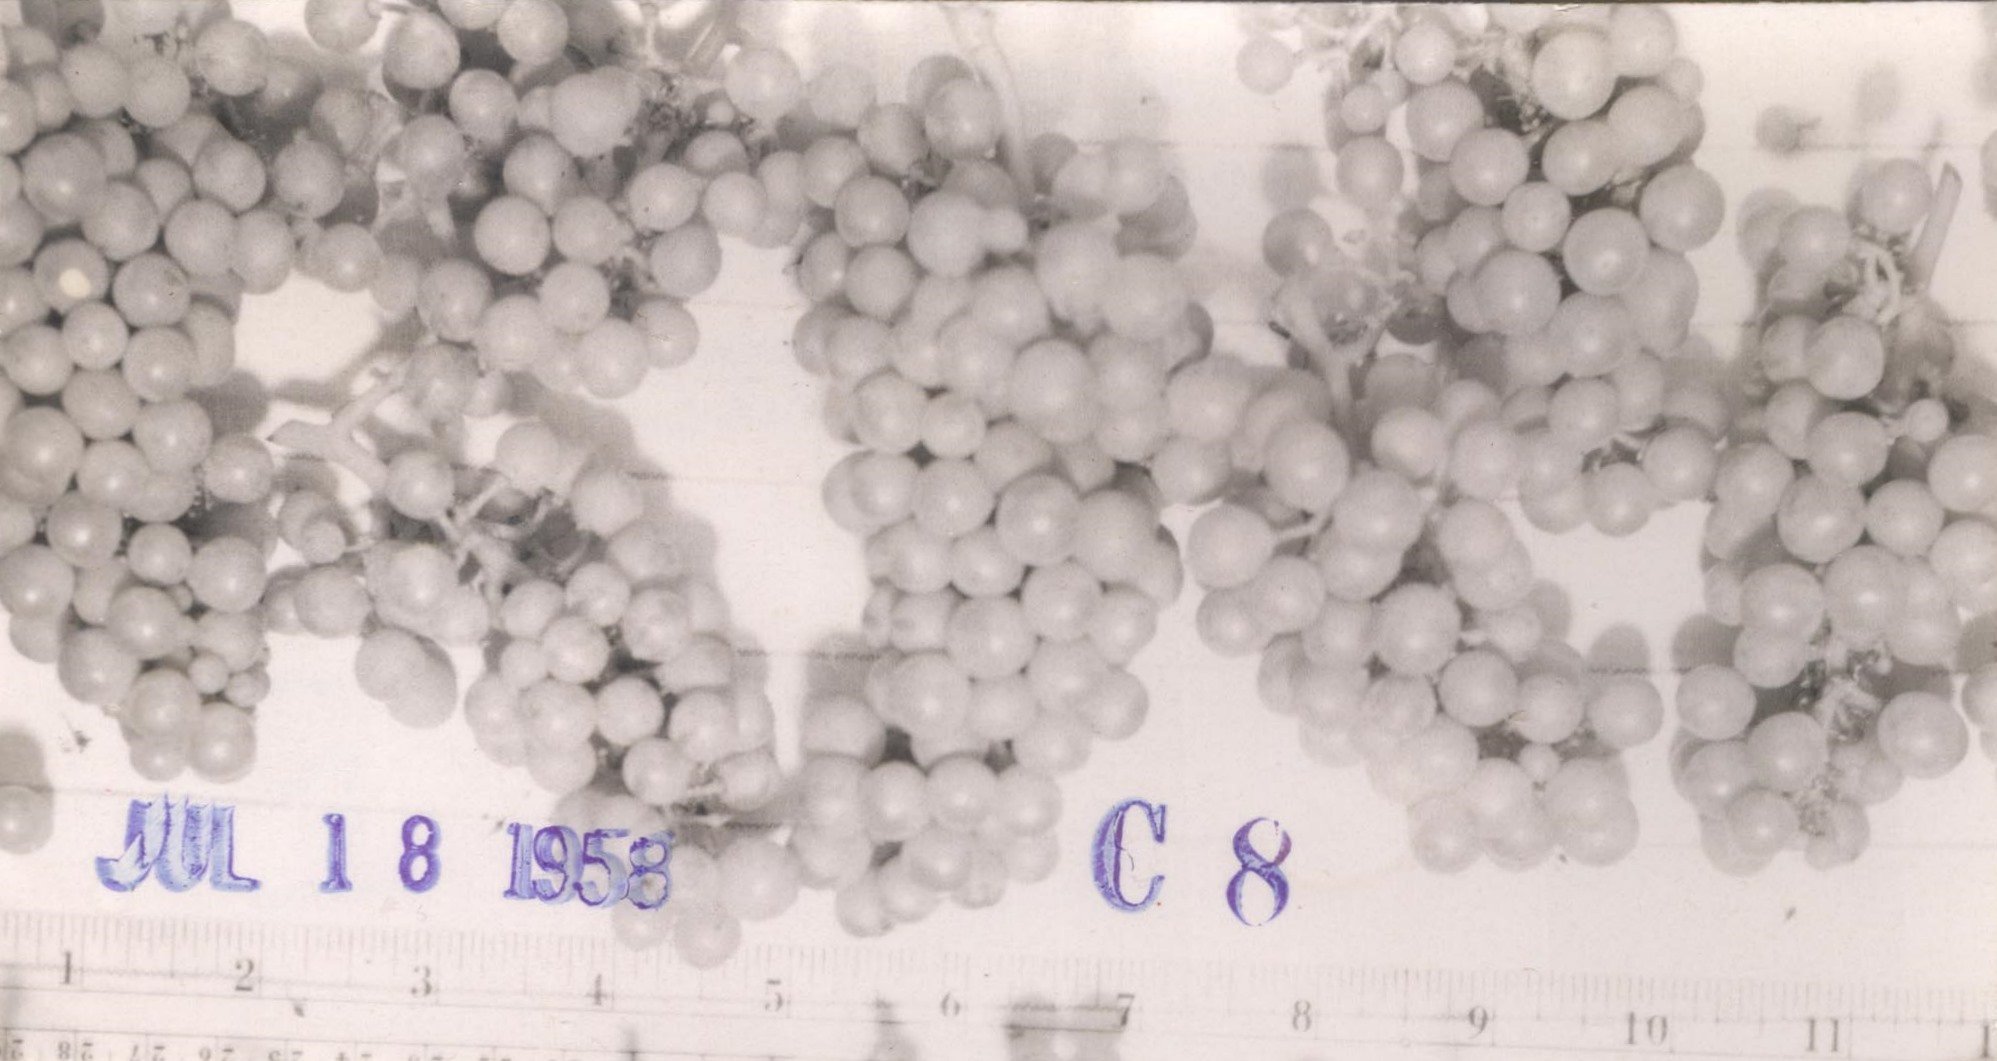 Black and white photo of chardonnay clusters in the 1950s